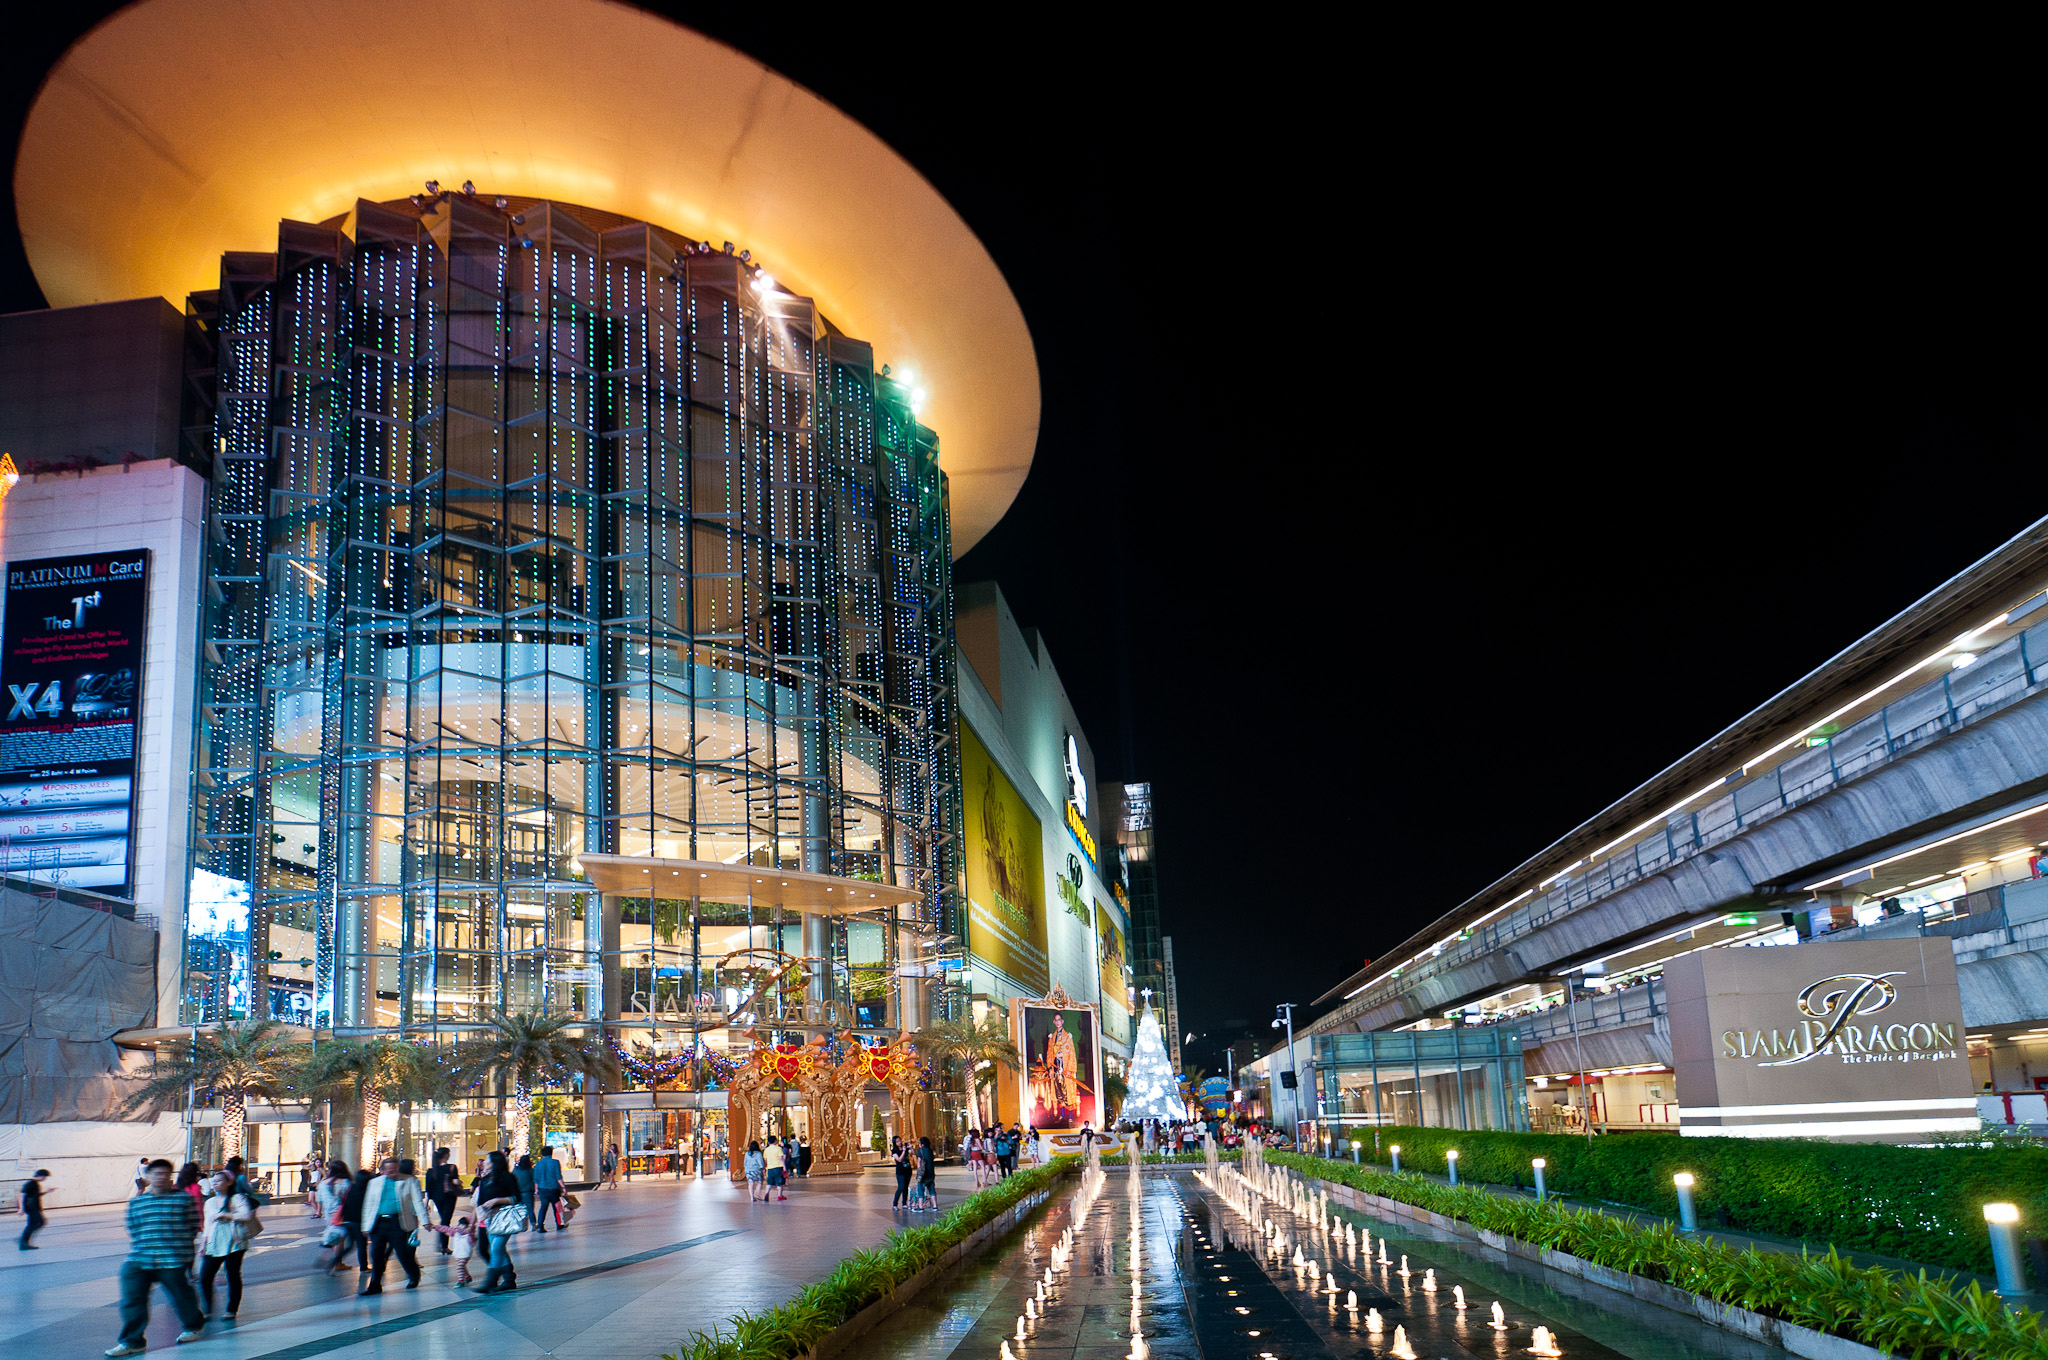 Siam Paragon - Top 10 places to go shopping in Bangkok